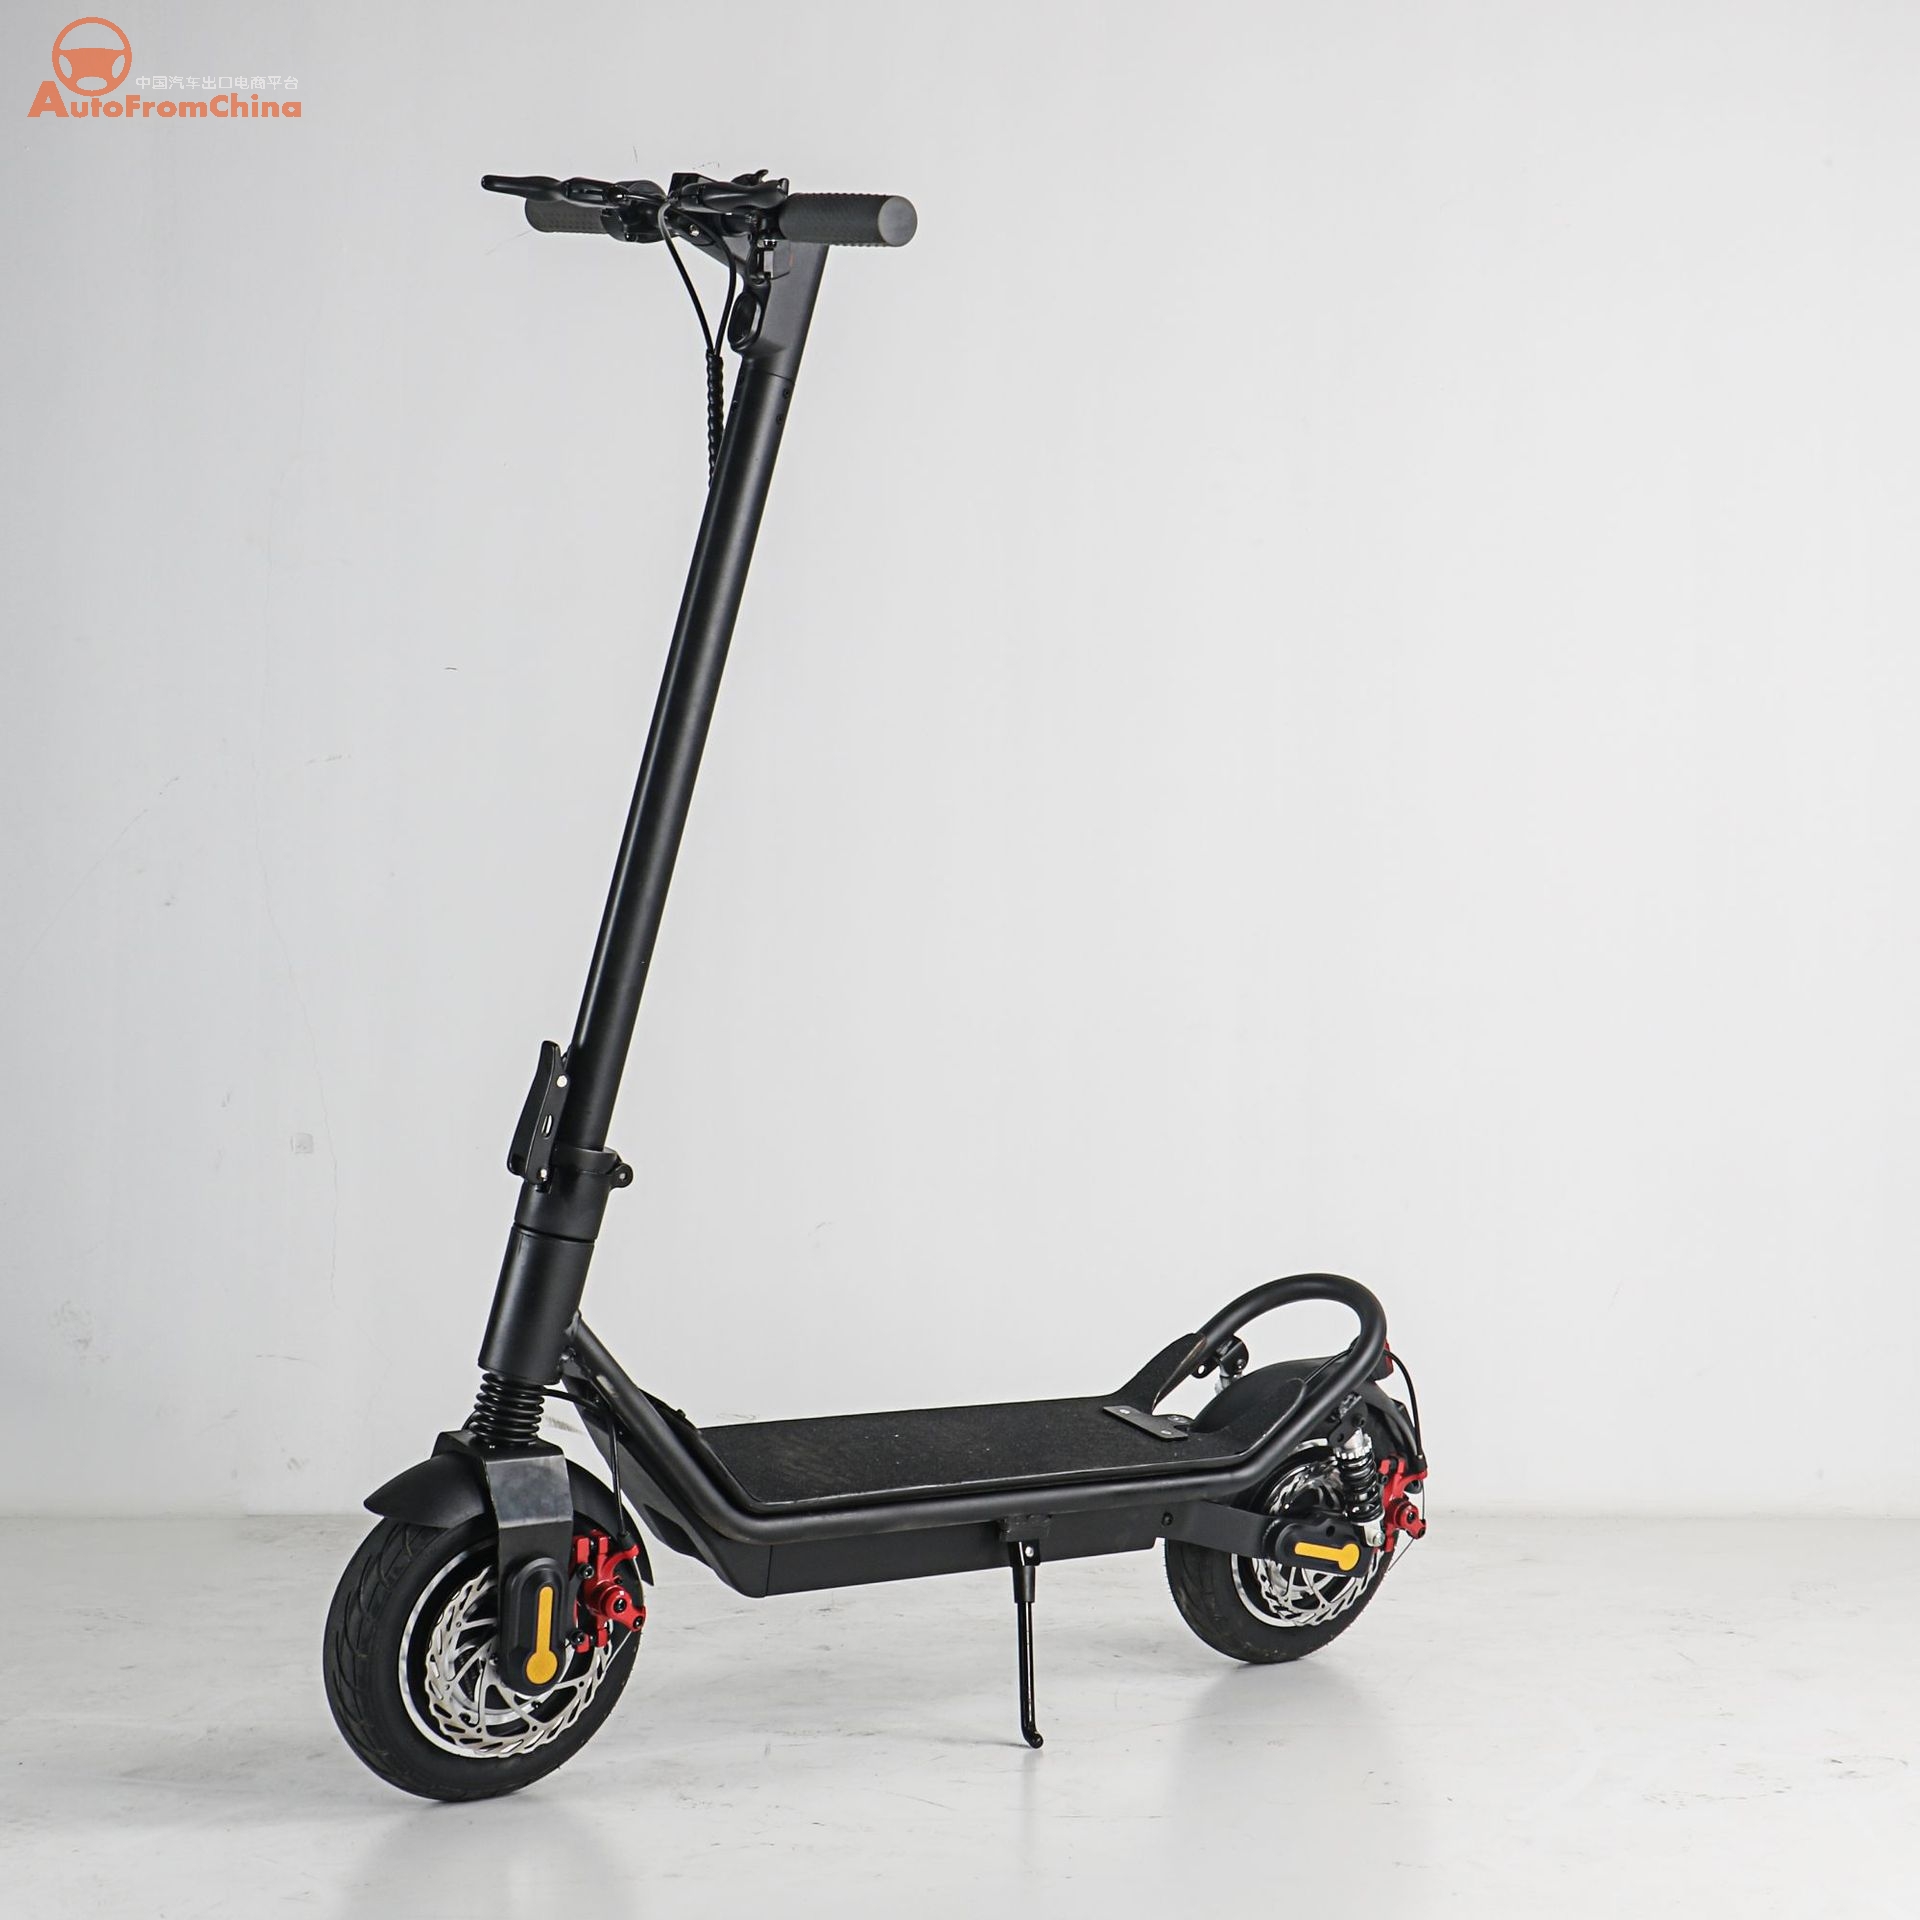 10 Inch  anti-skid tires 36v/ 48v 1000w electric  Scooter 2 Wheeler ,Push scooters Kick Scooters